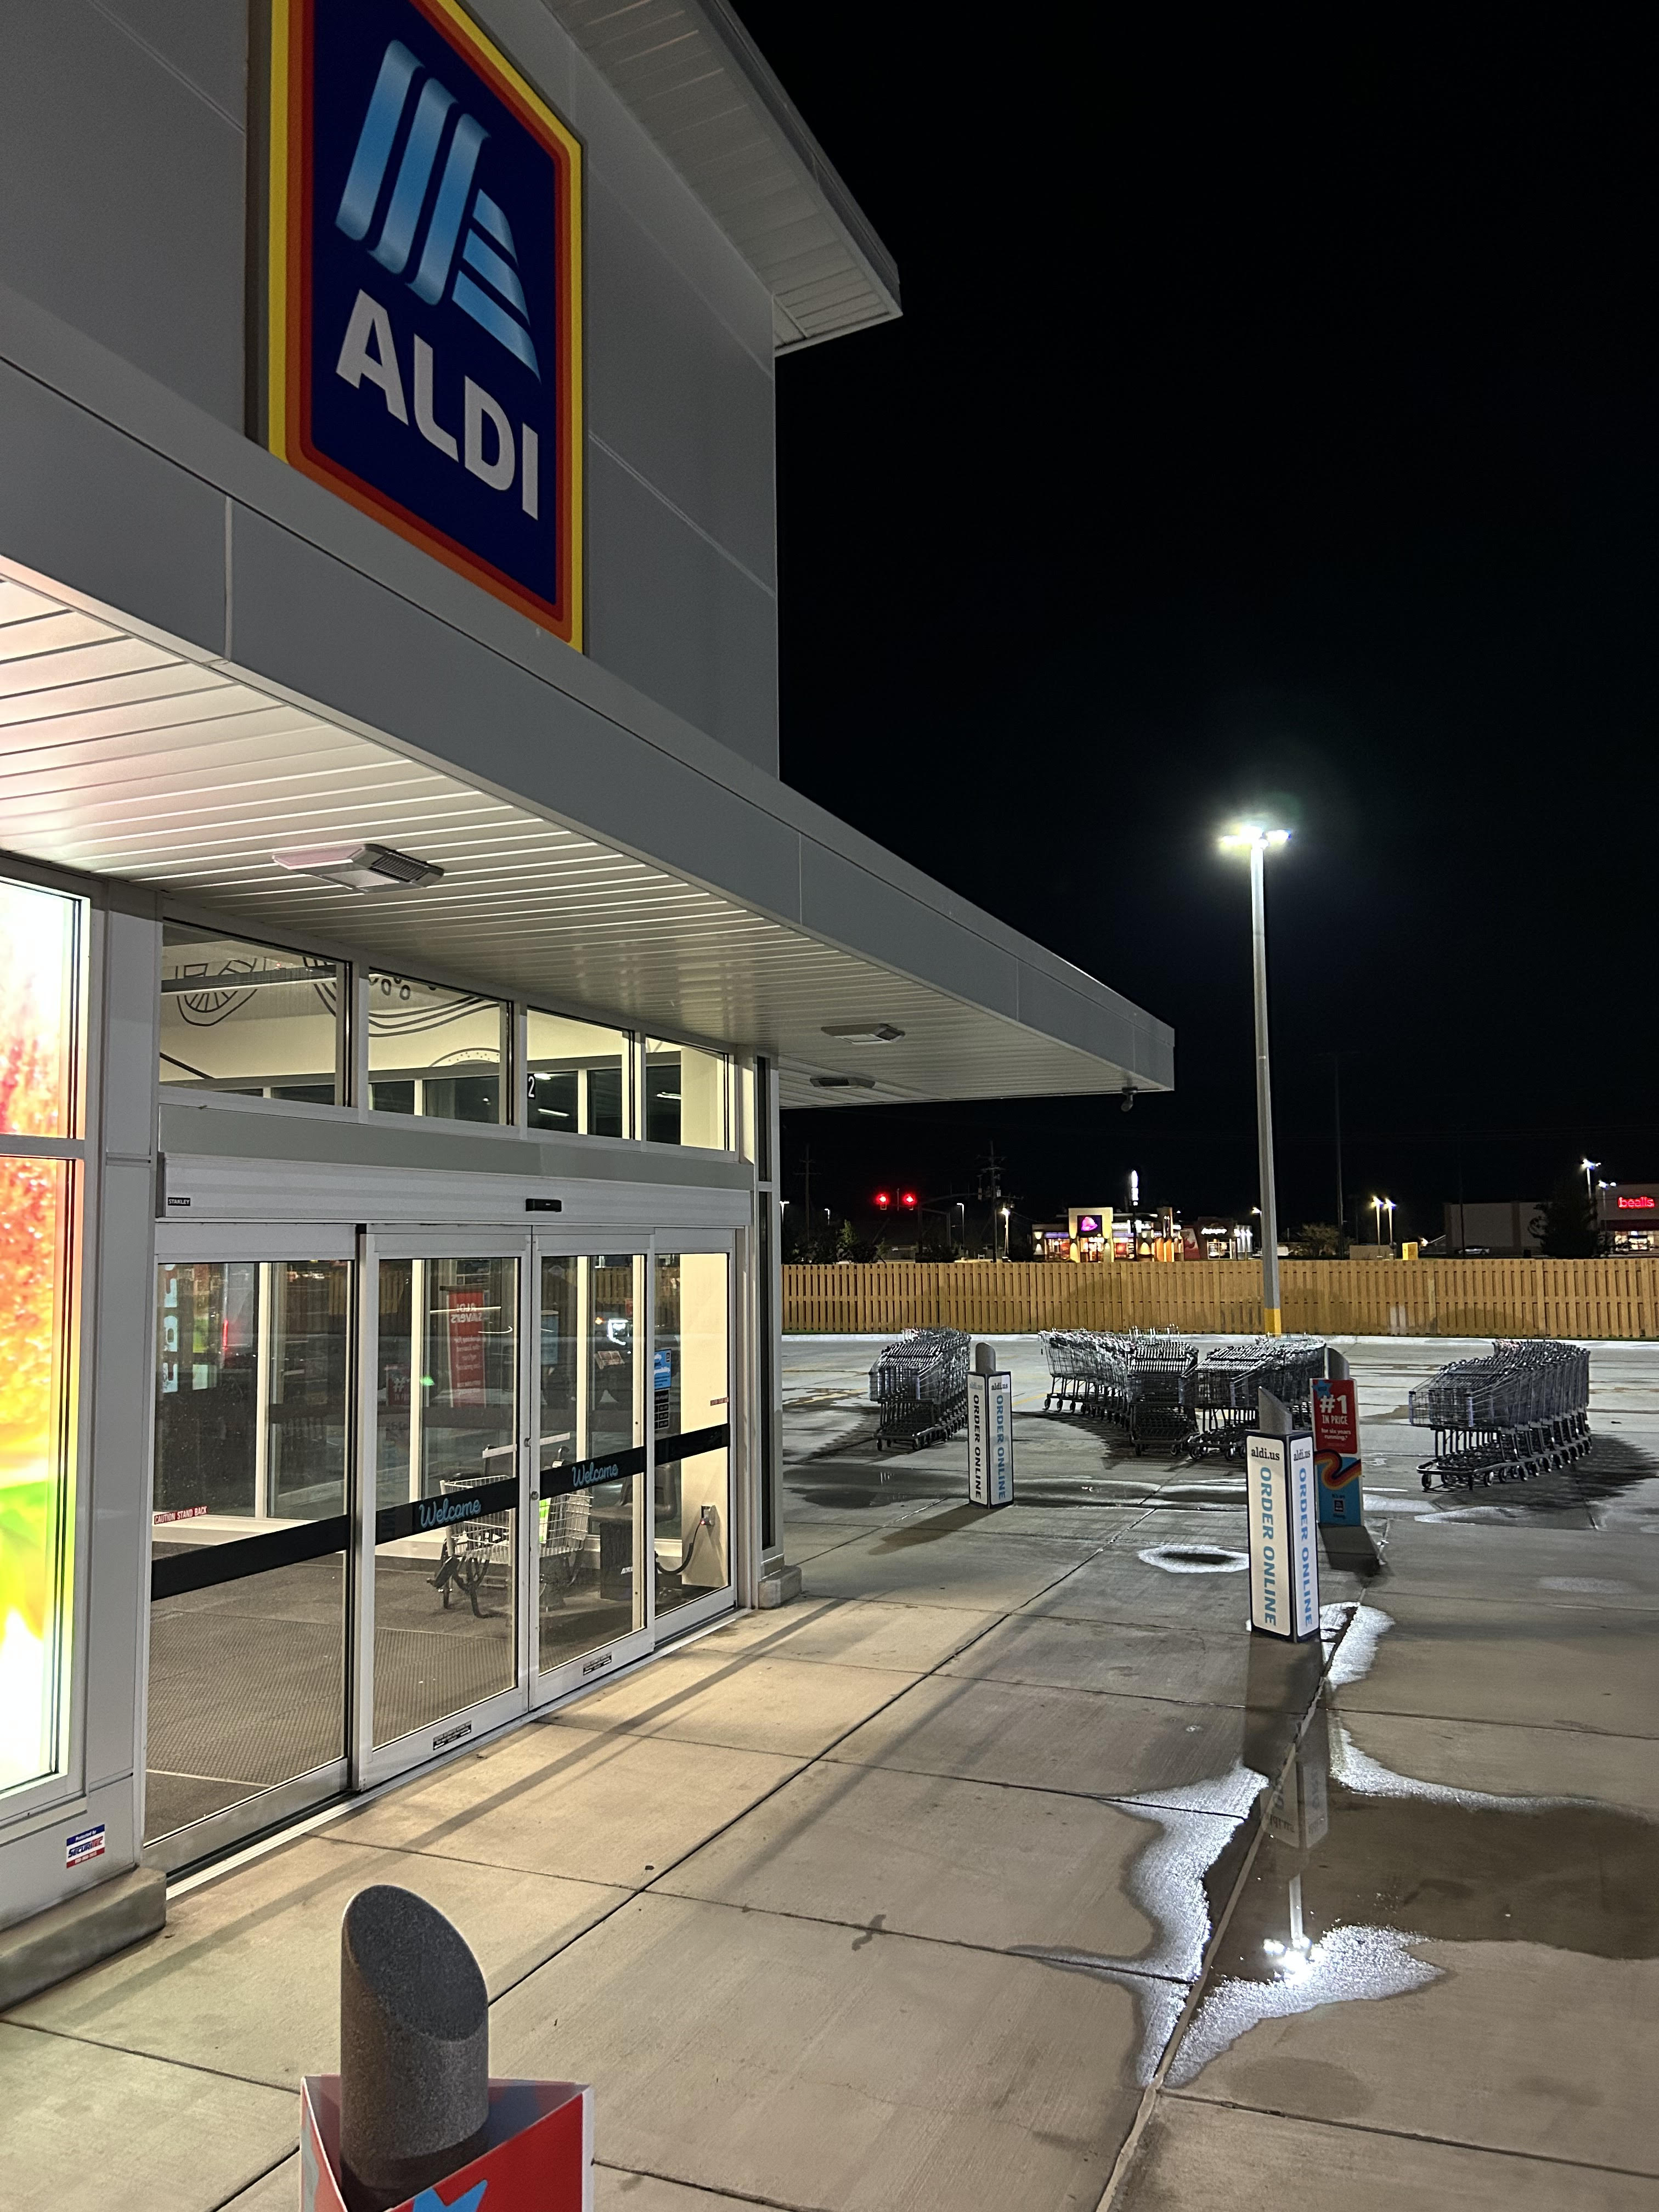 Commercial Pressure Washing ALDI Grocery Stores Across Thibodaux and Louisiana